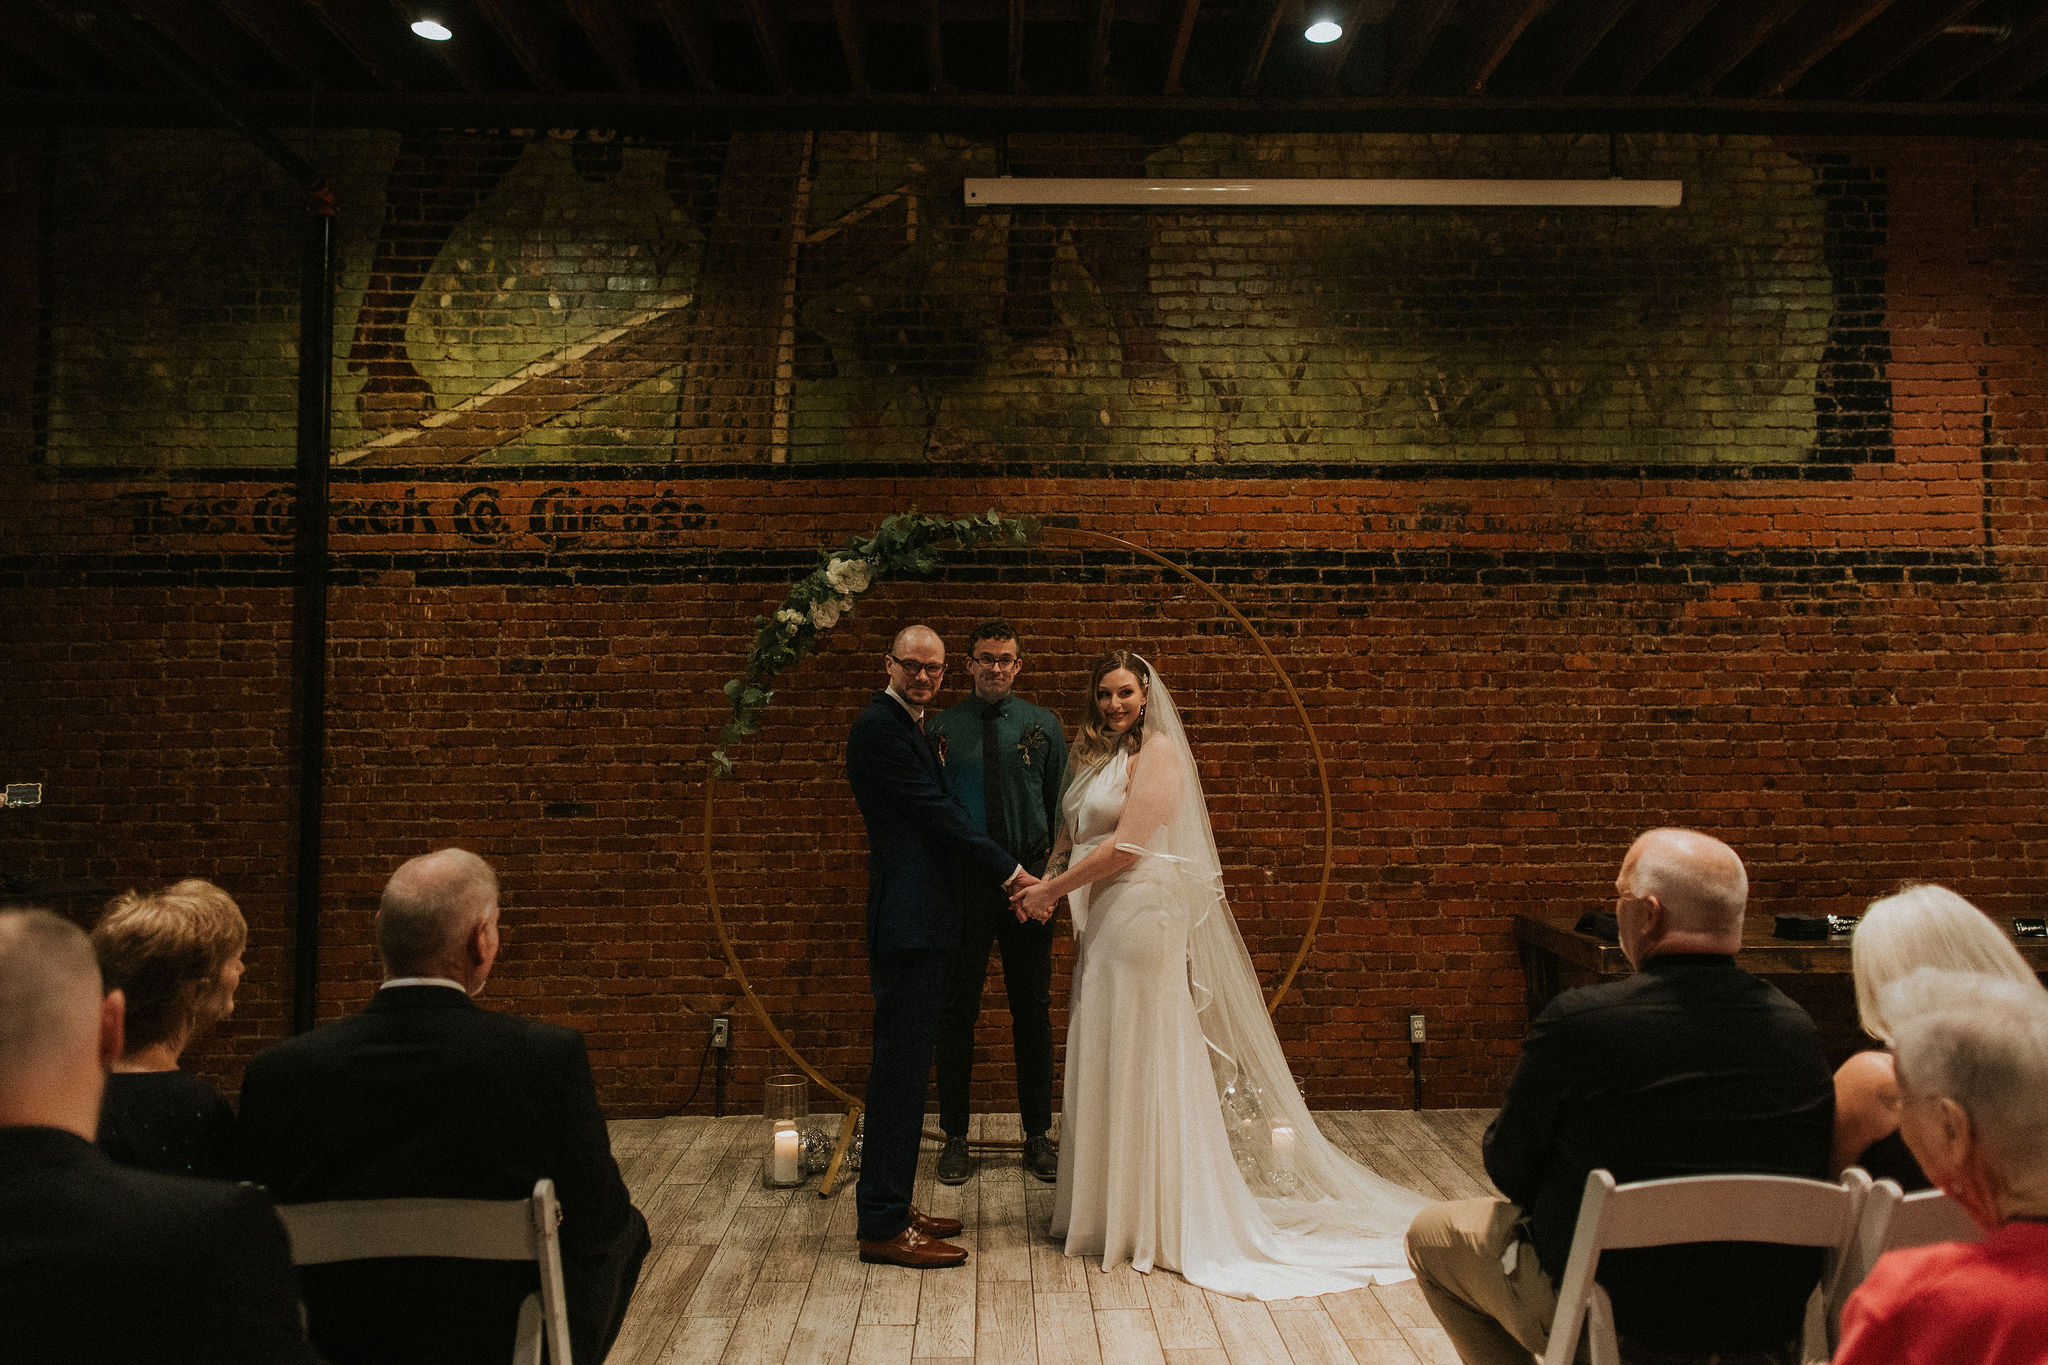 A bride and groom stand facing one another during their wedding ceremony at their venue, Reality on Monroe in Bloomington, Illinois